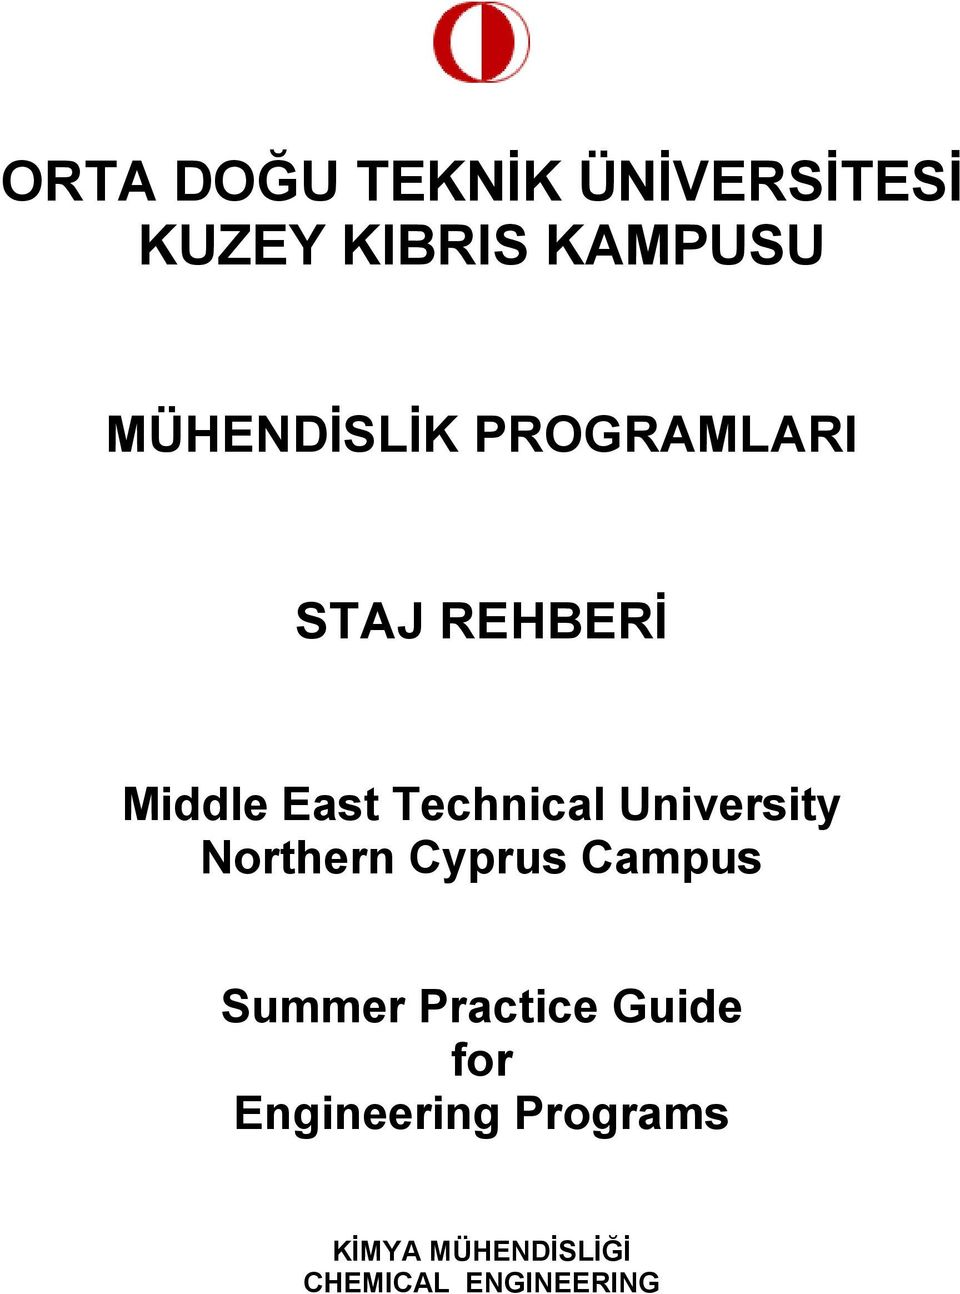 Technical University Northern Cyprus Campus Summer